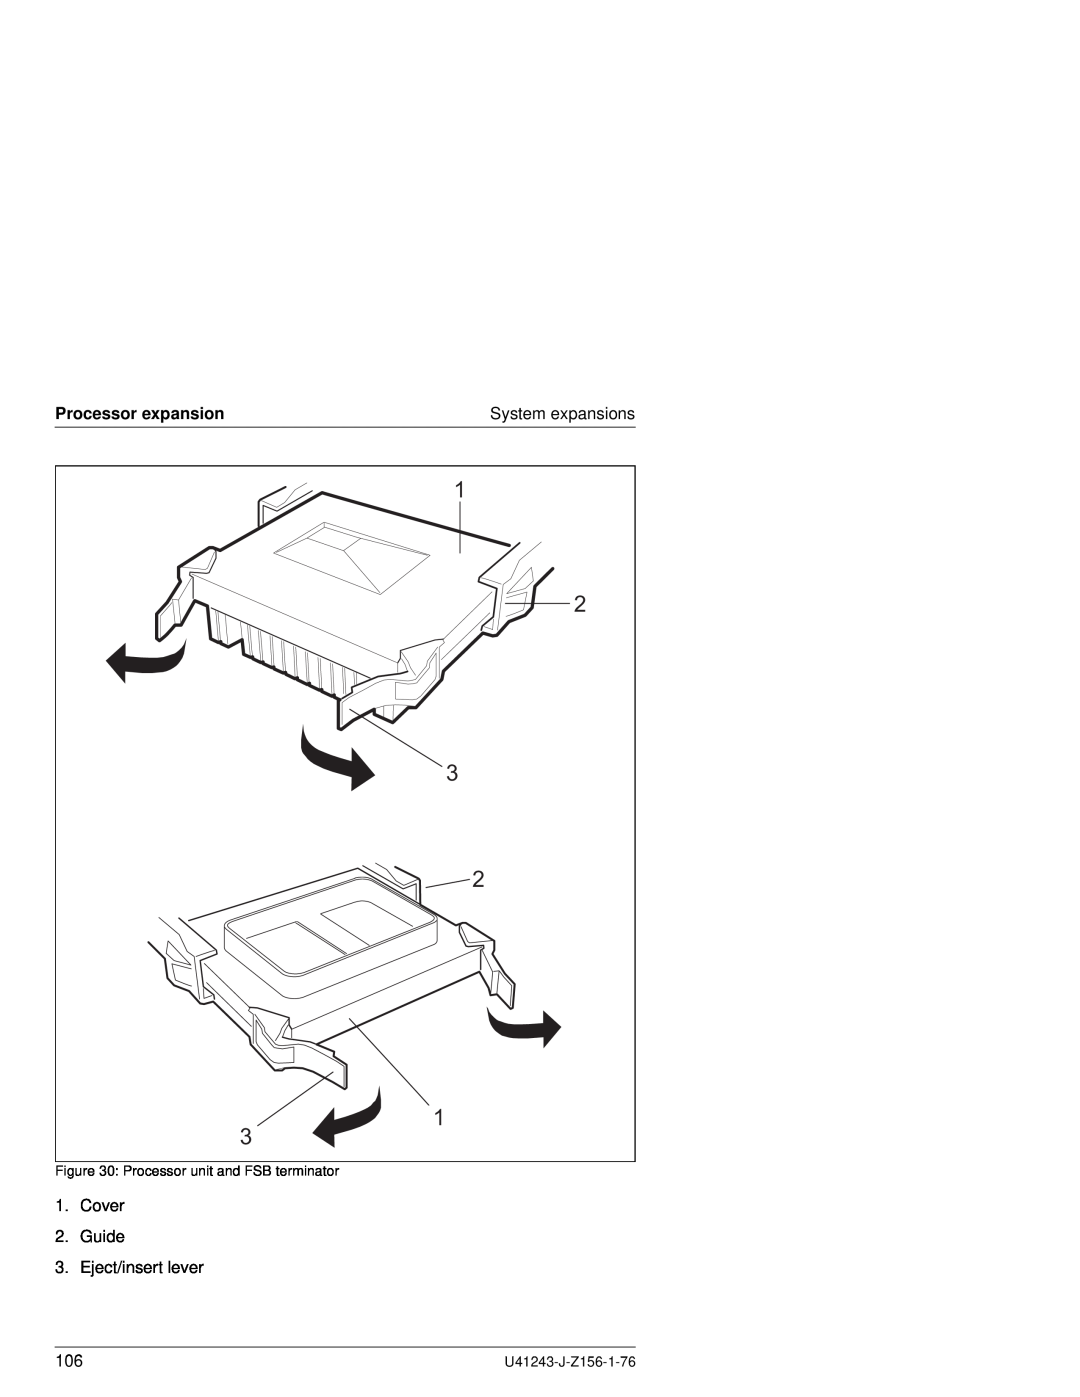 Fujitsu N800 manual Processor expansion, Cover 2. Guide 3. Eject/insert lever, System expansions, U41243-J-Z156-1-76 